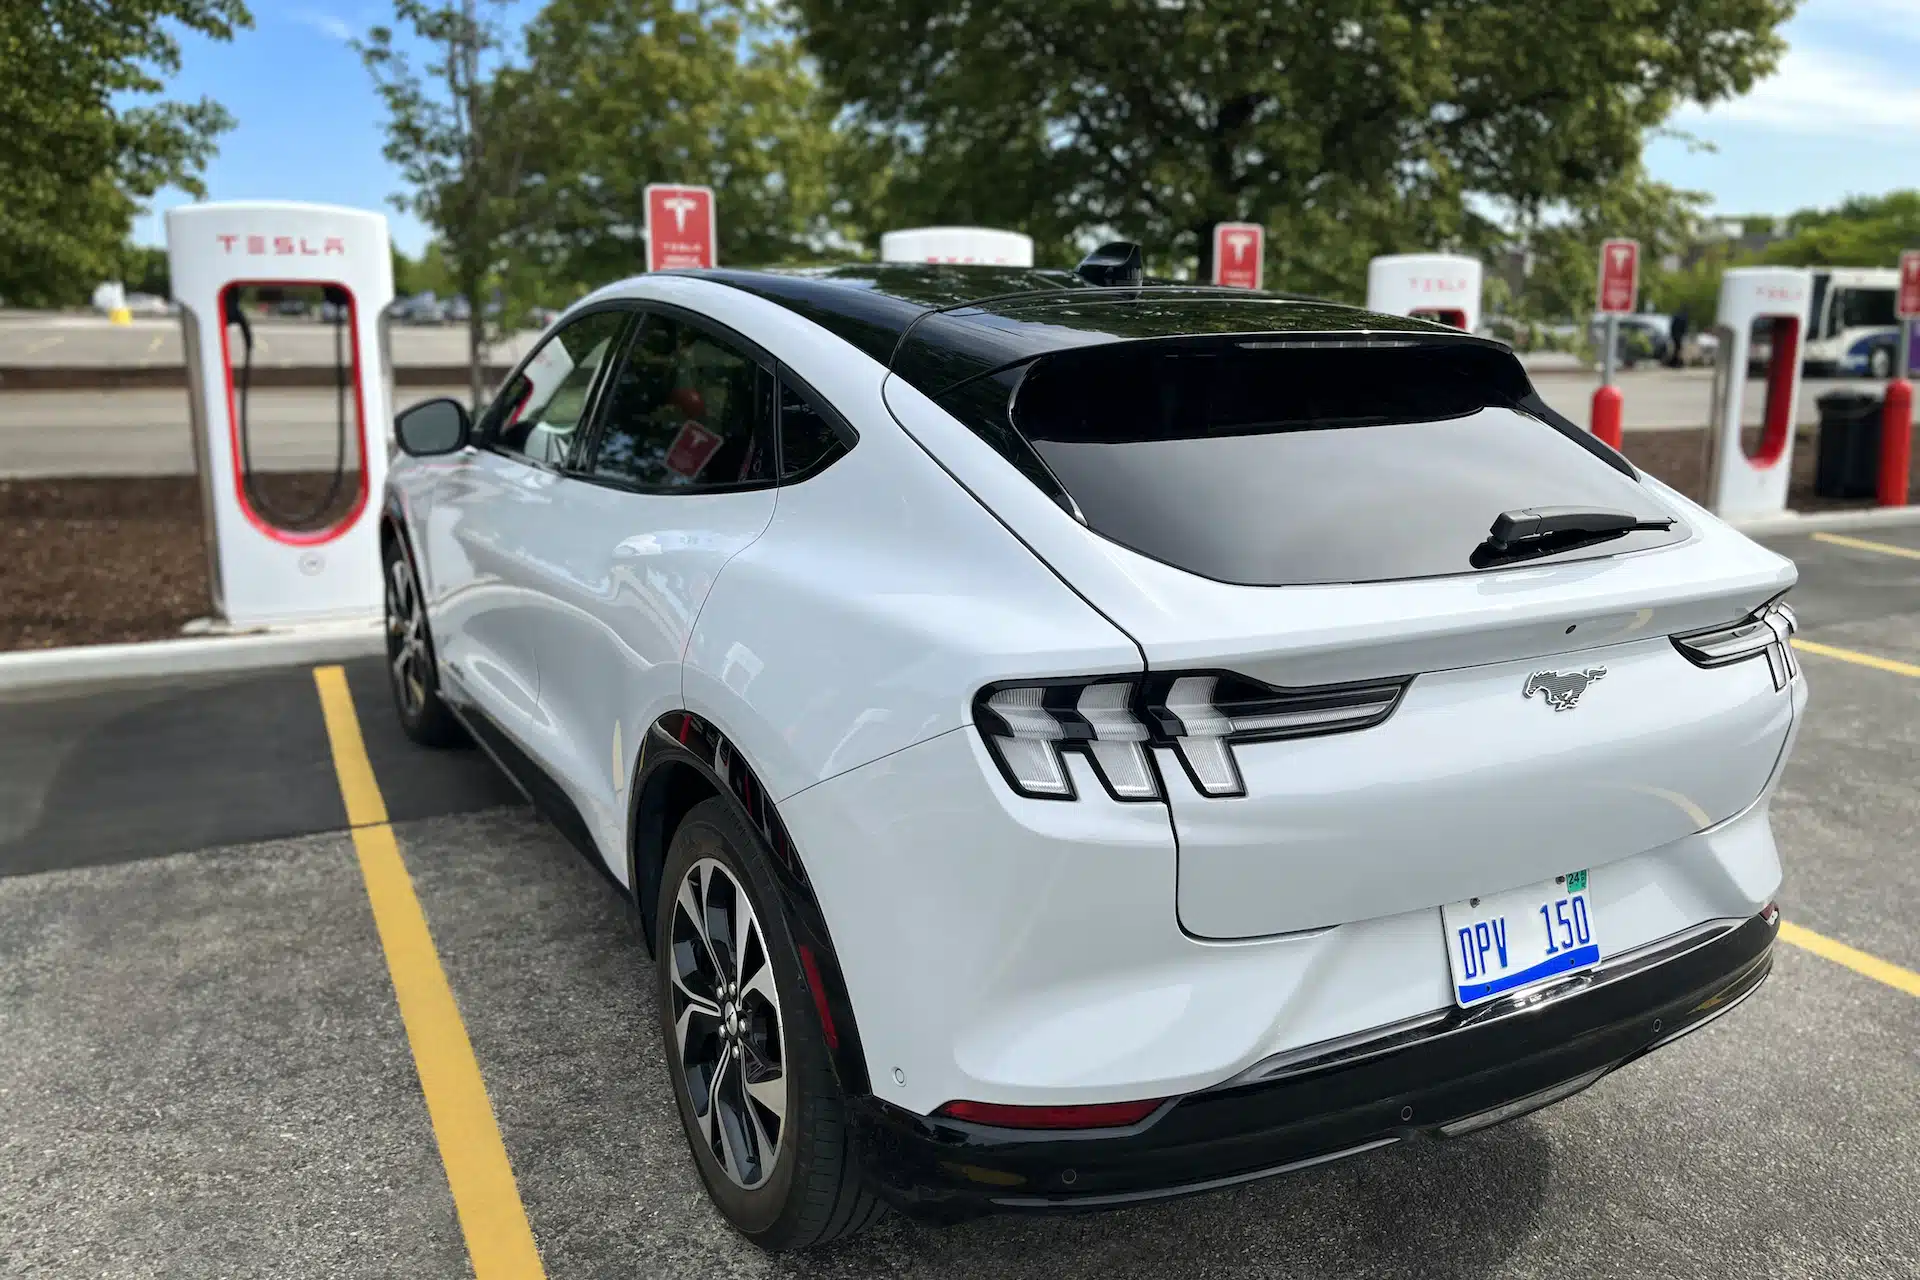 Ford Mustang charging at a Tesla Supercharger (image: Ford)